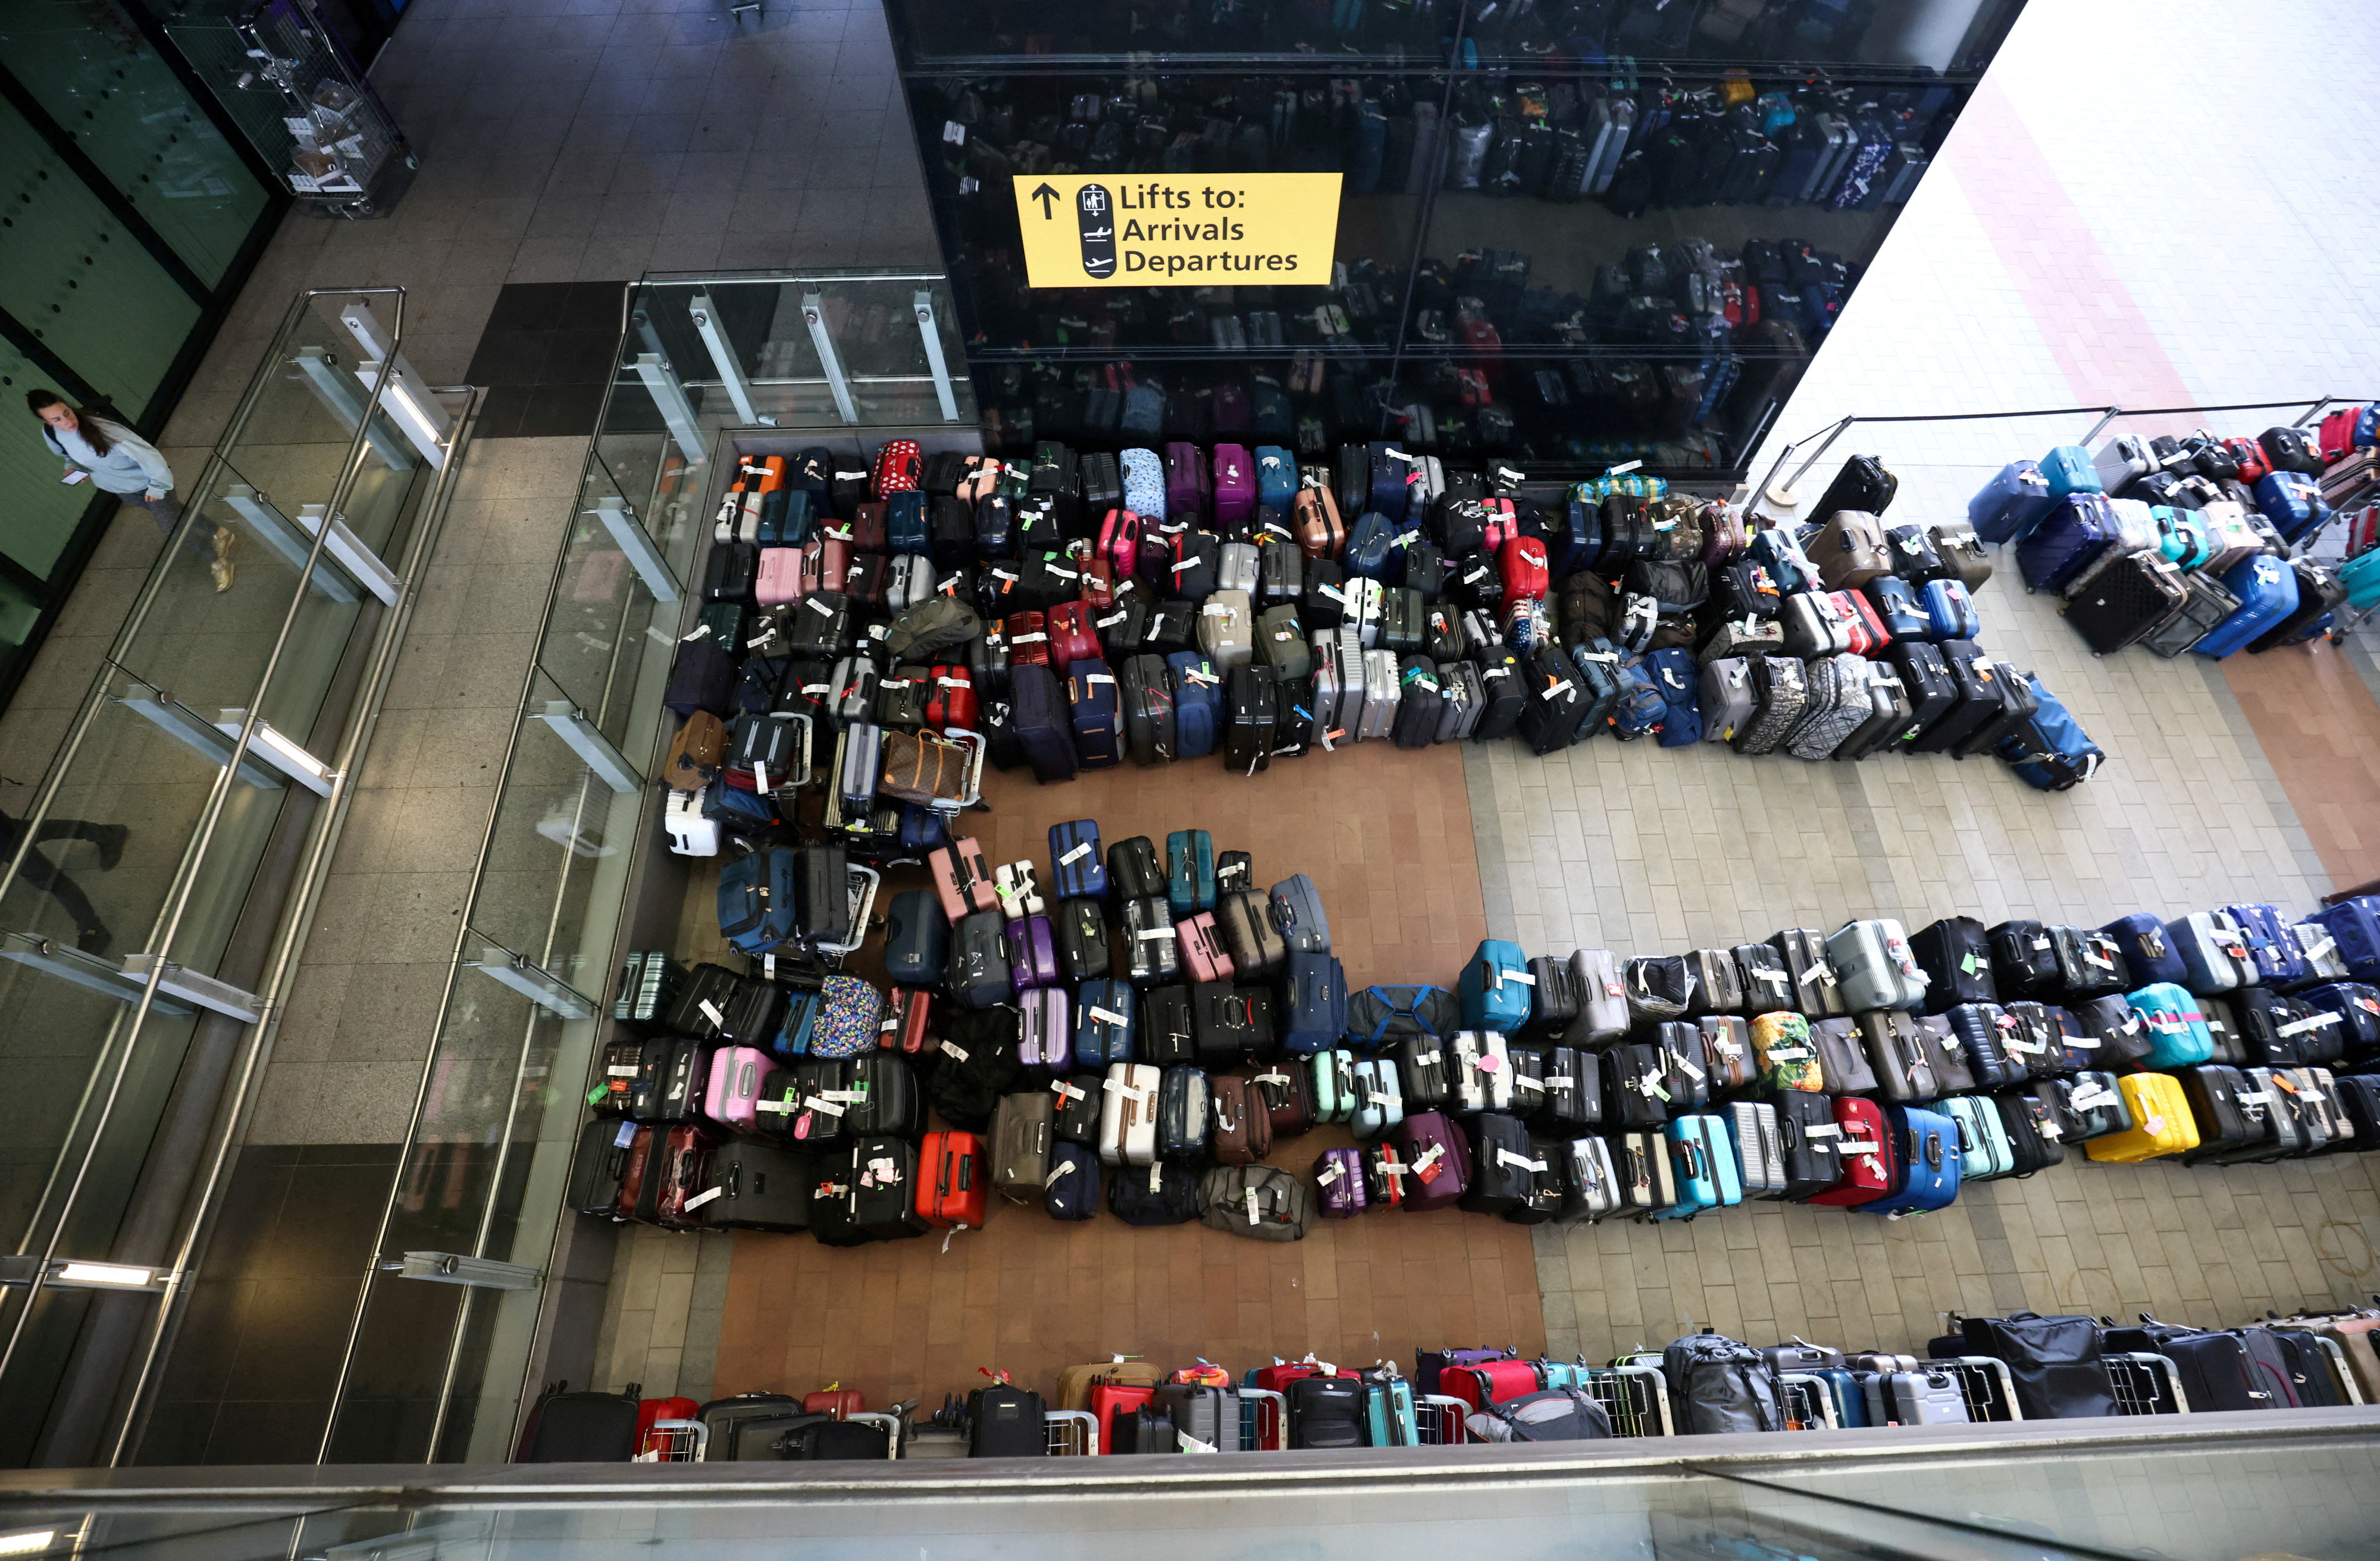 Lines of passenger luggage lie arranged outside Terminal 2 at Heathrow Airport in London